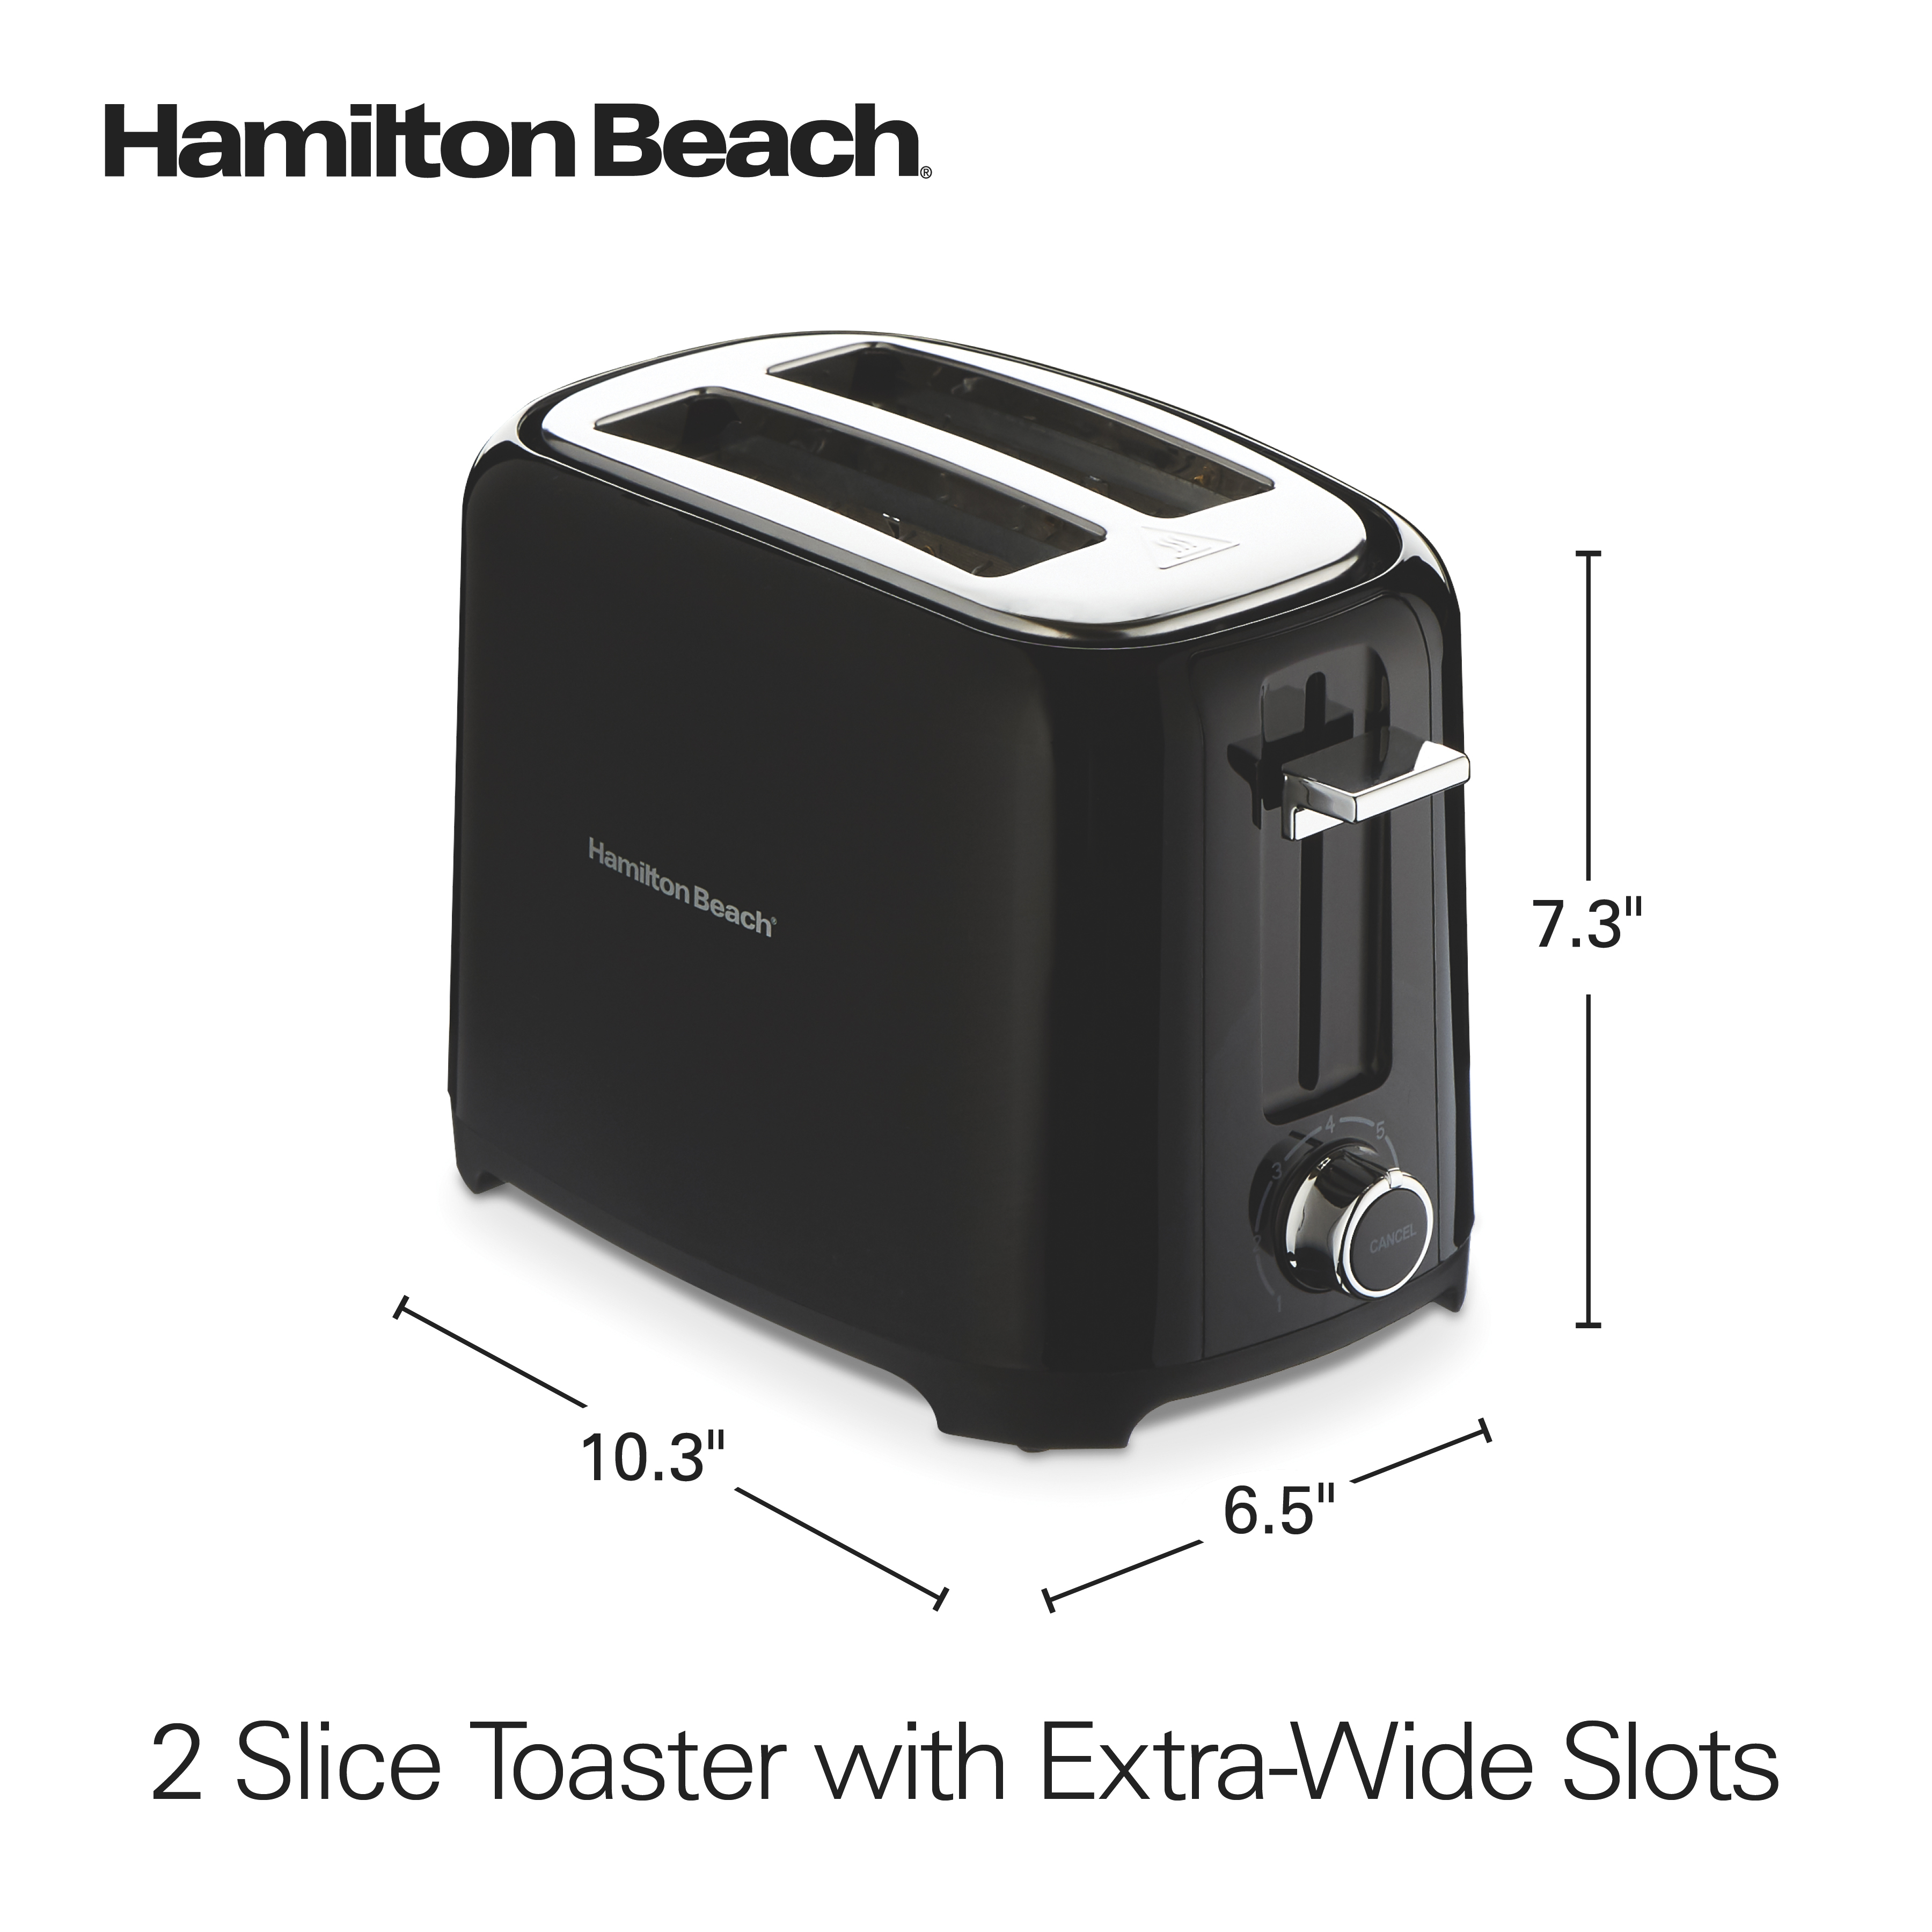 Hamilton Beach 2 Slice Toaster, Extra-Wide Slots, Chrome-Plated Lever, Black, 22217 - image 3 of 8